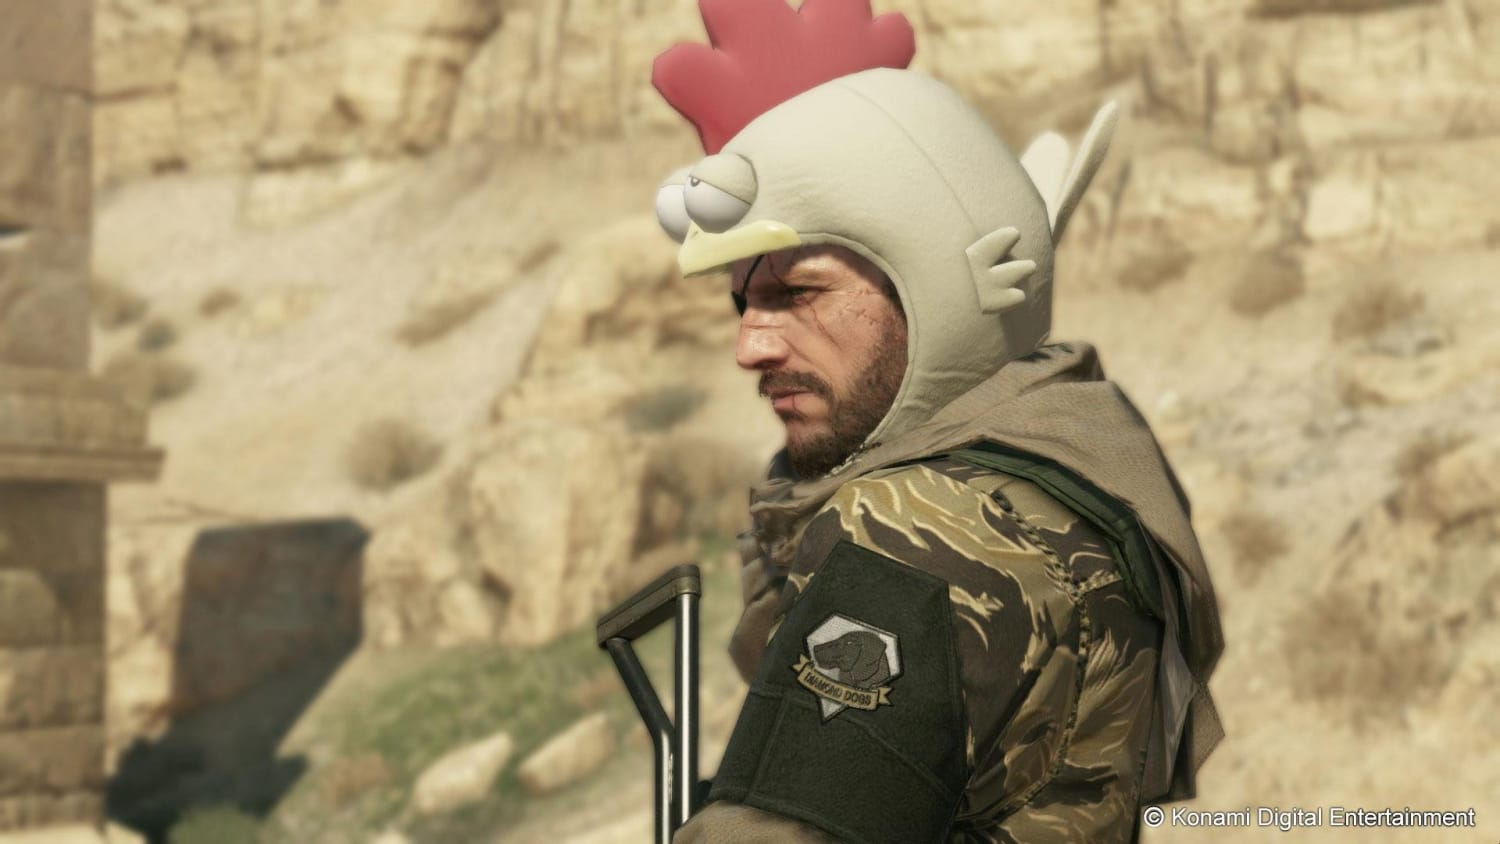 Metal Gear Solid V: The Phantom Pain review – greatest stealth